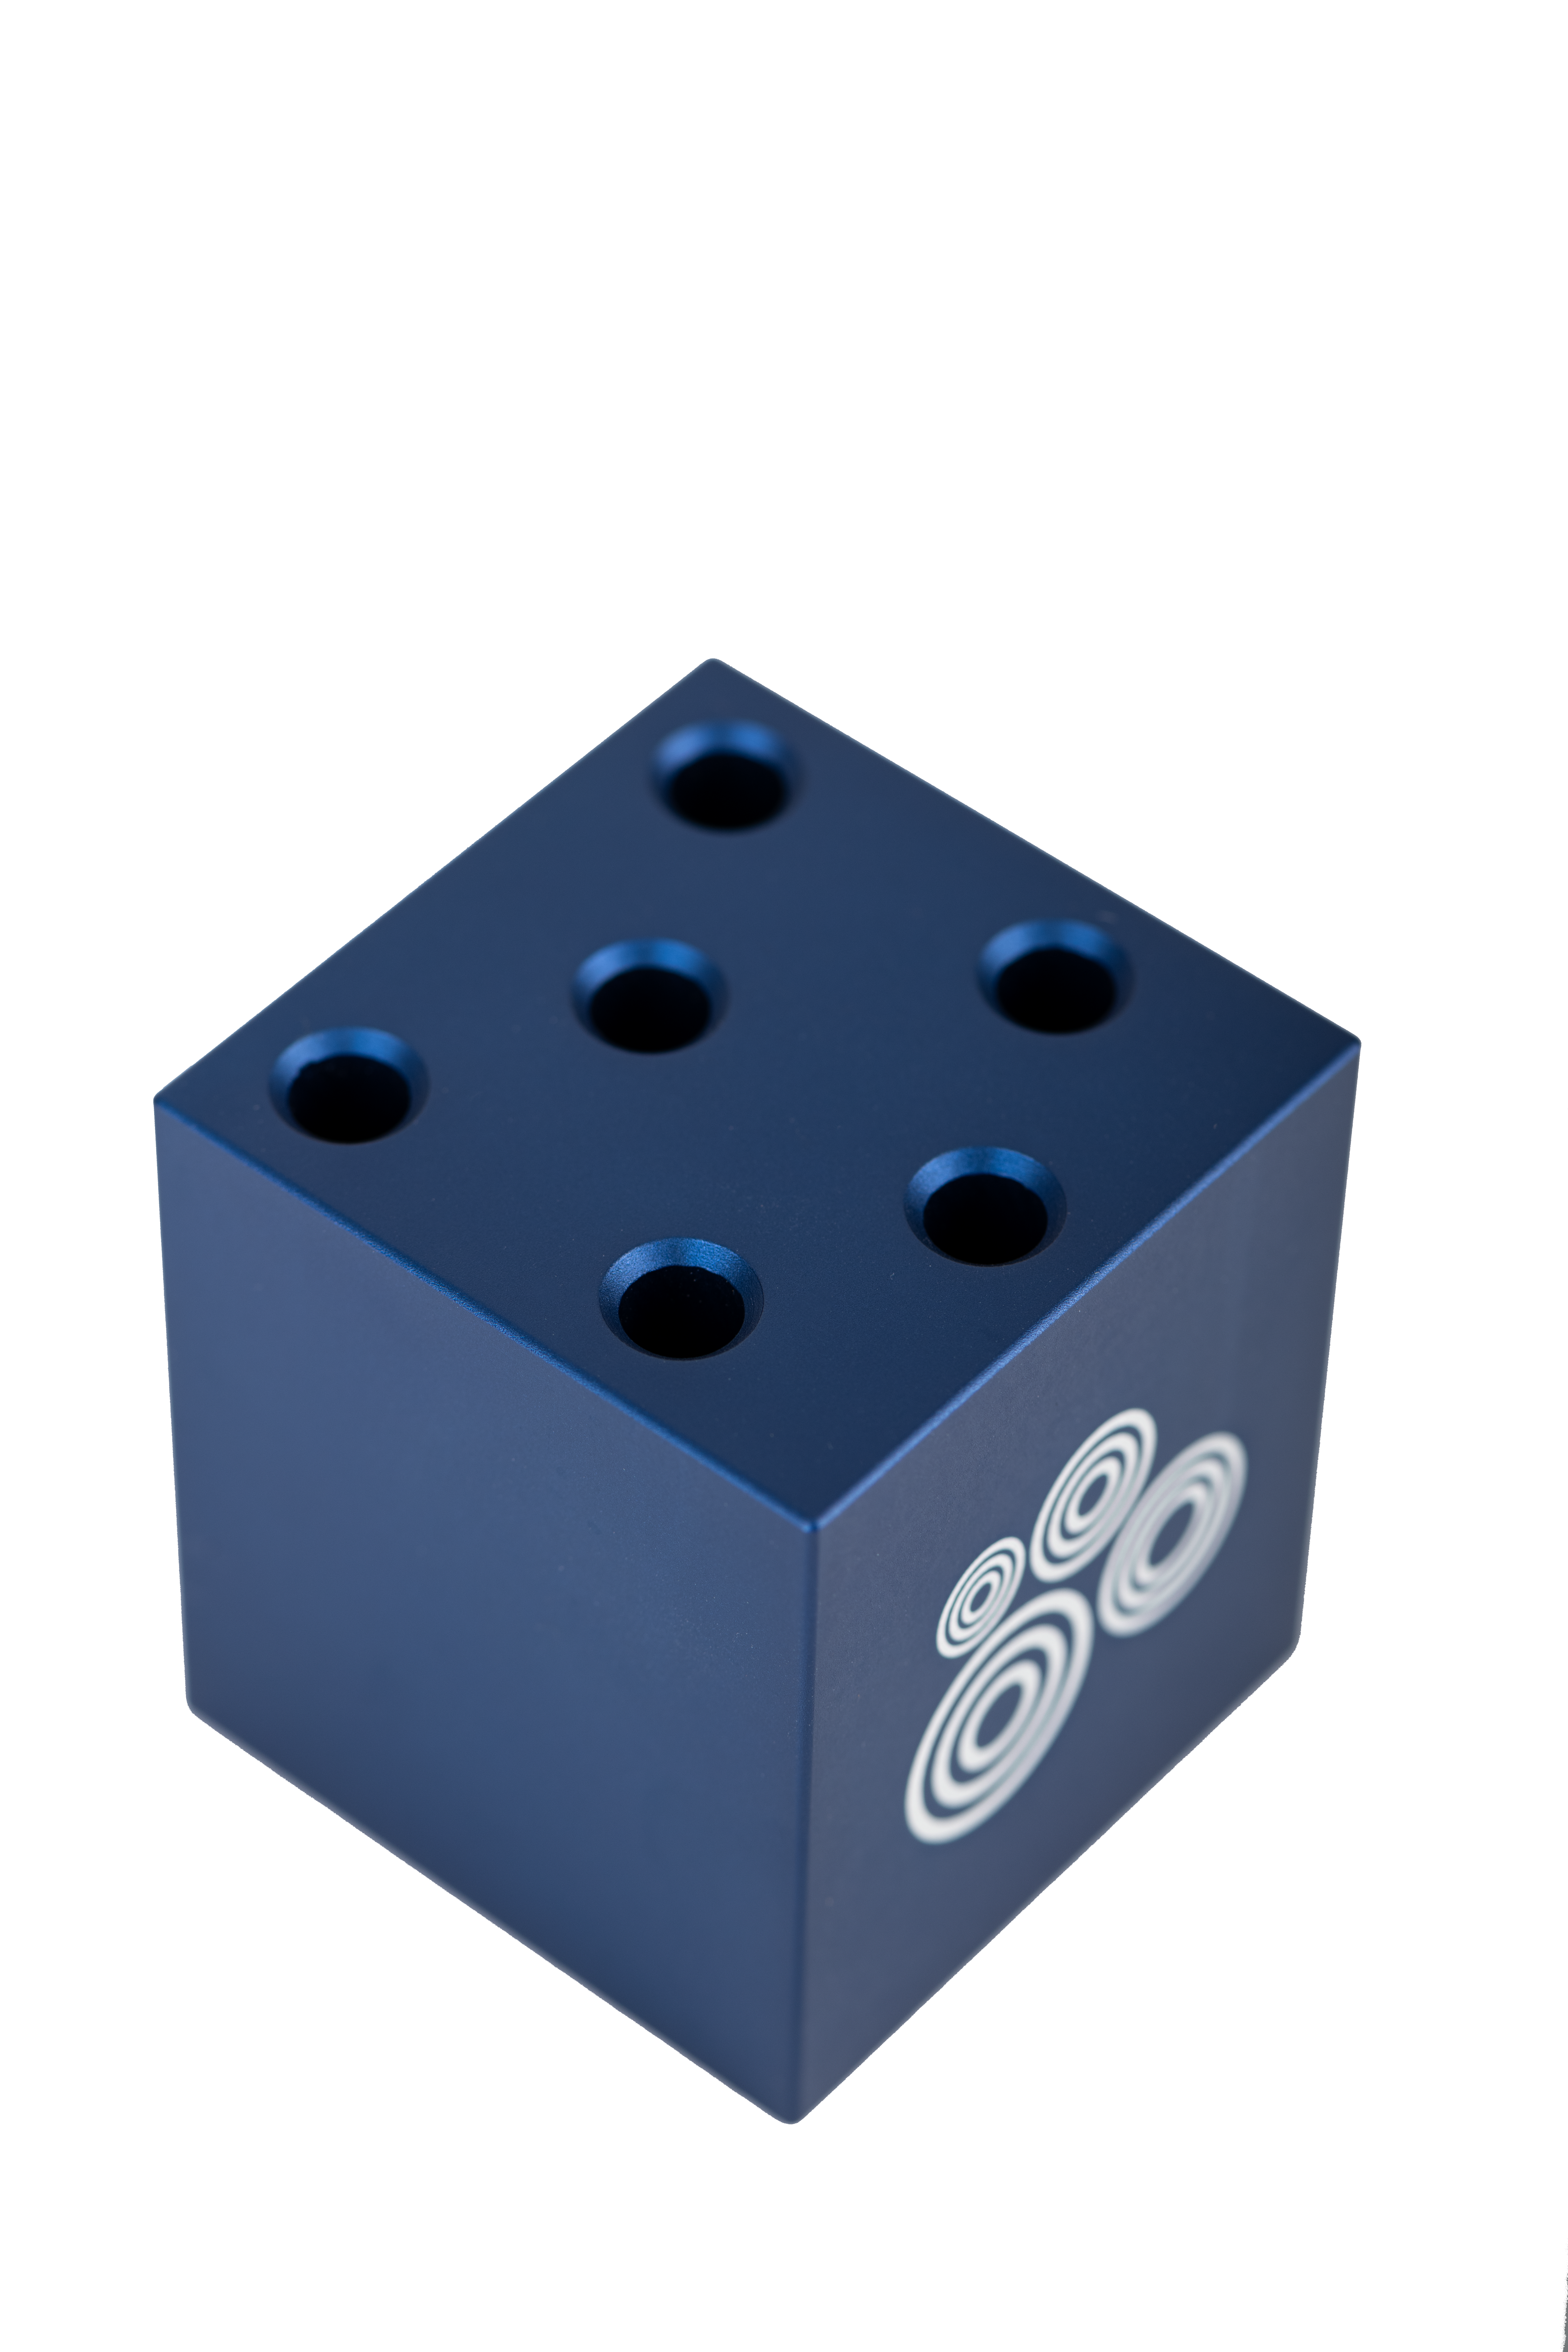 MPF Cube Stand Blue